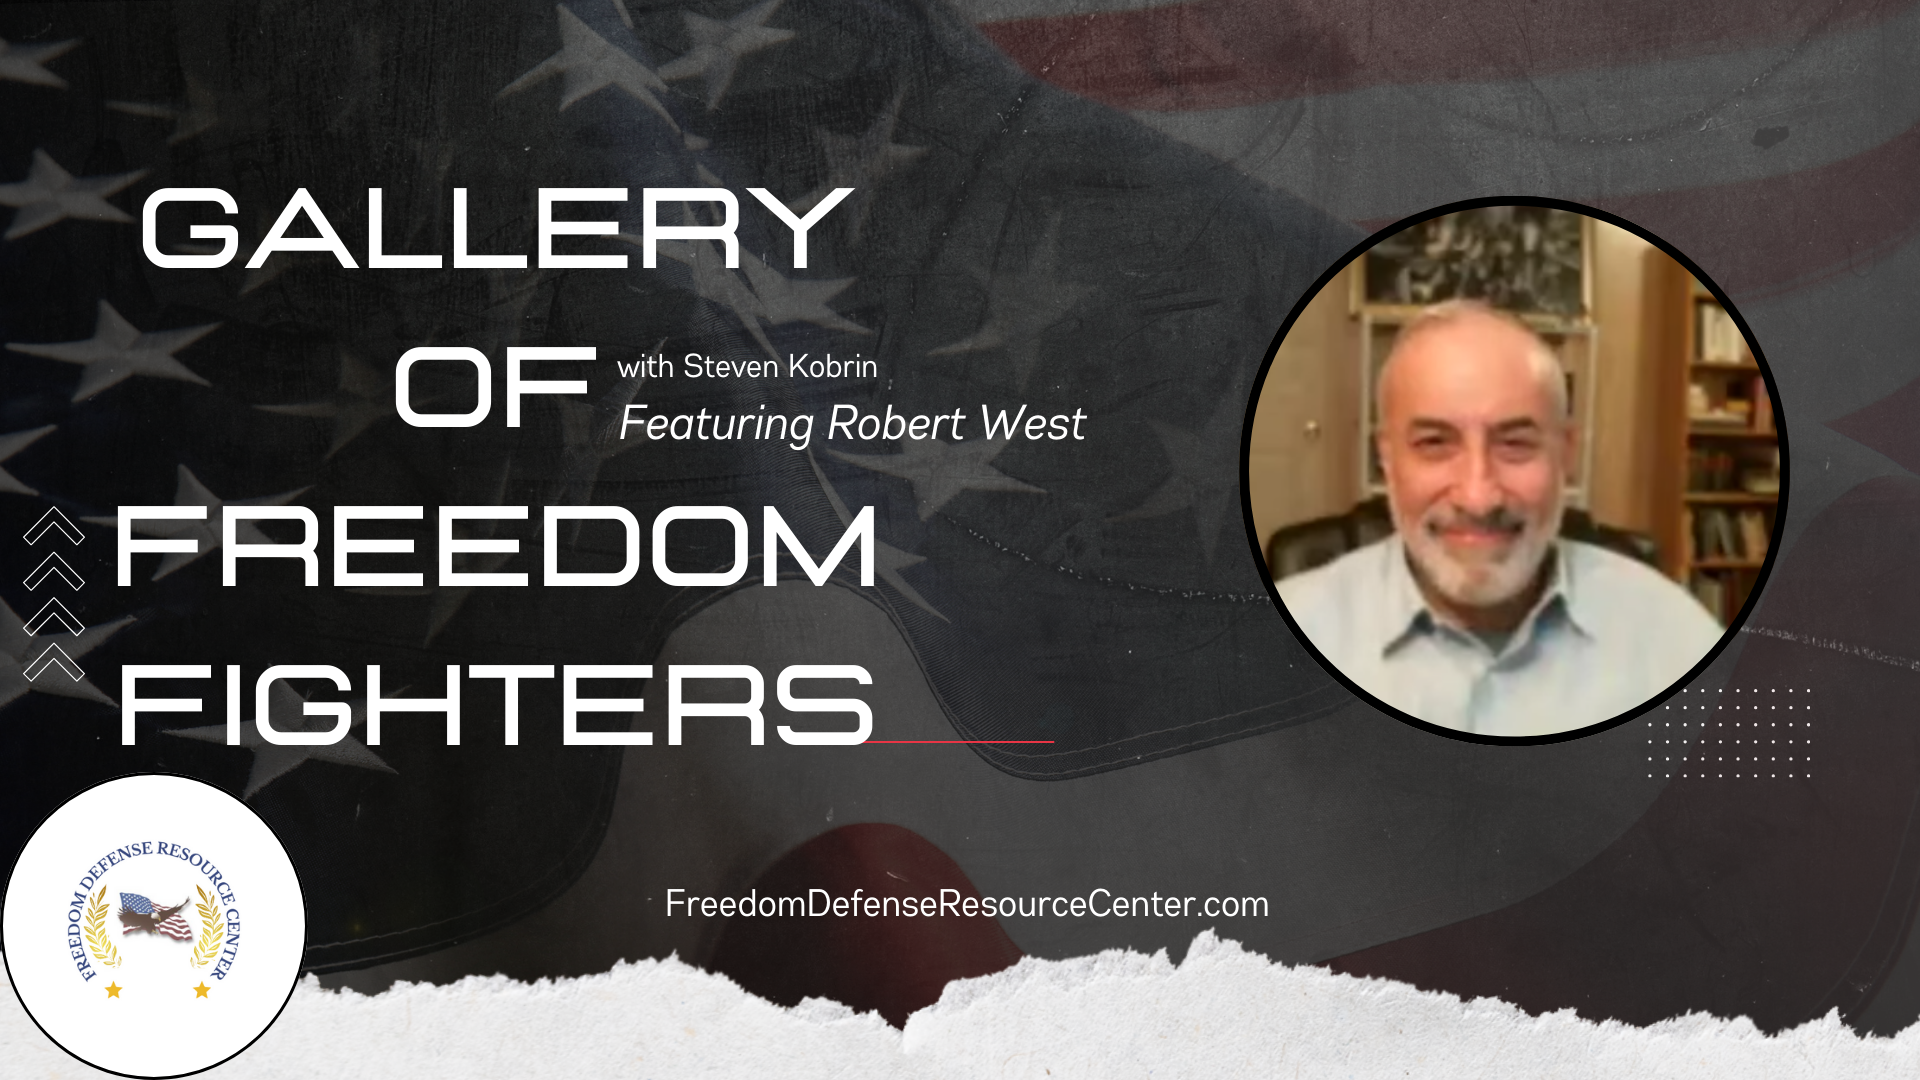 GFF51-Robert West - Gallery of Freedom Fighters